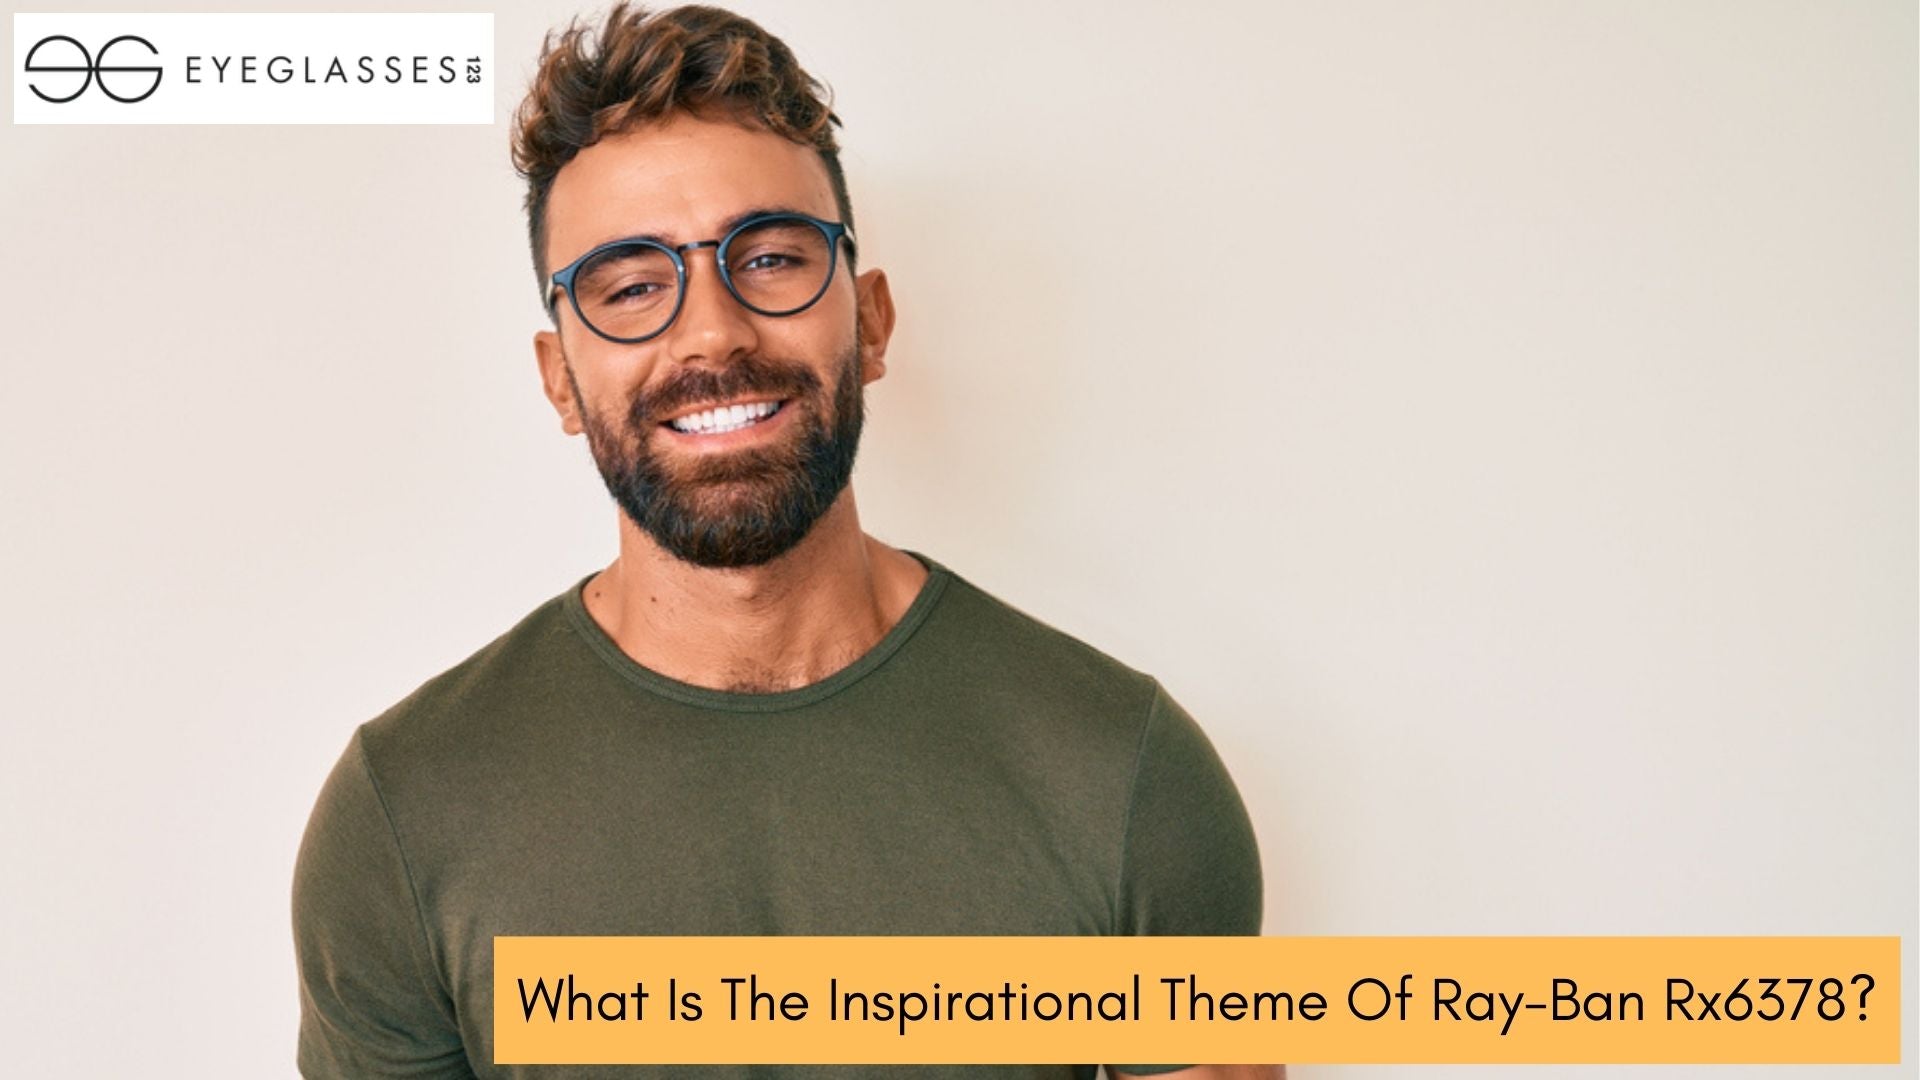 What Is The Inspirational Theme Of Ray-Ban Rx6378?